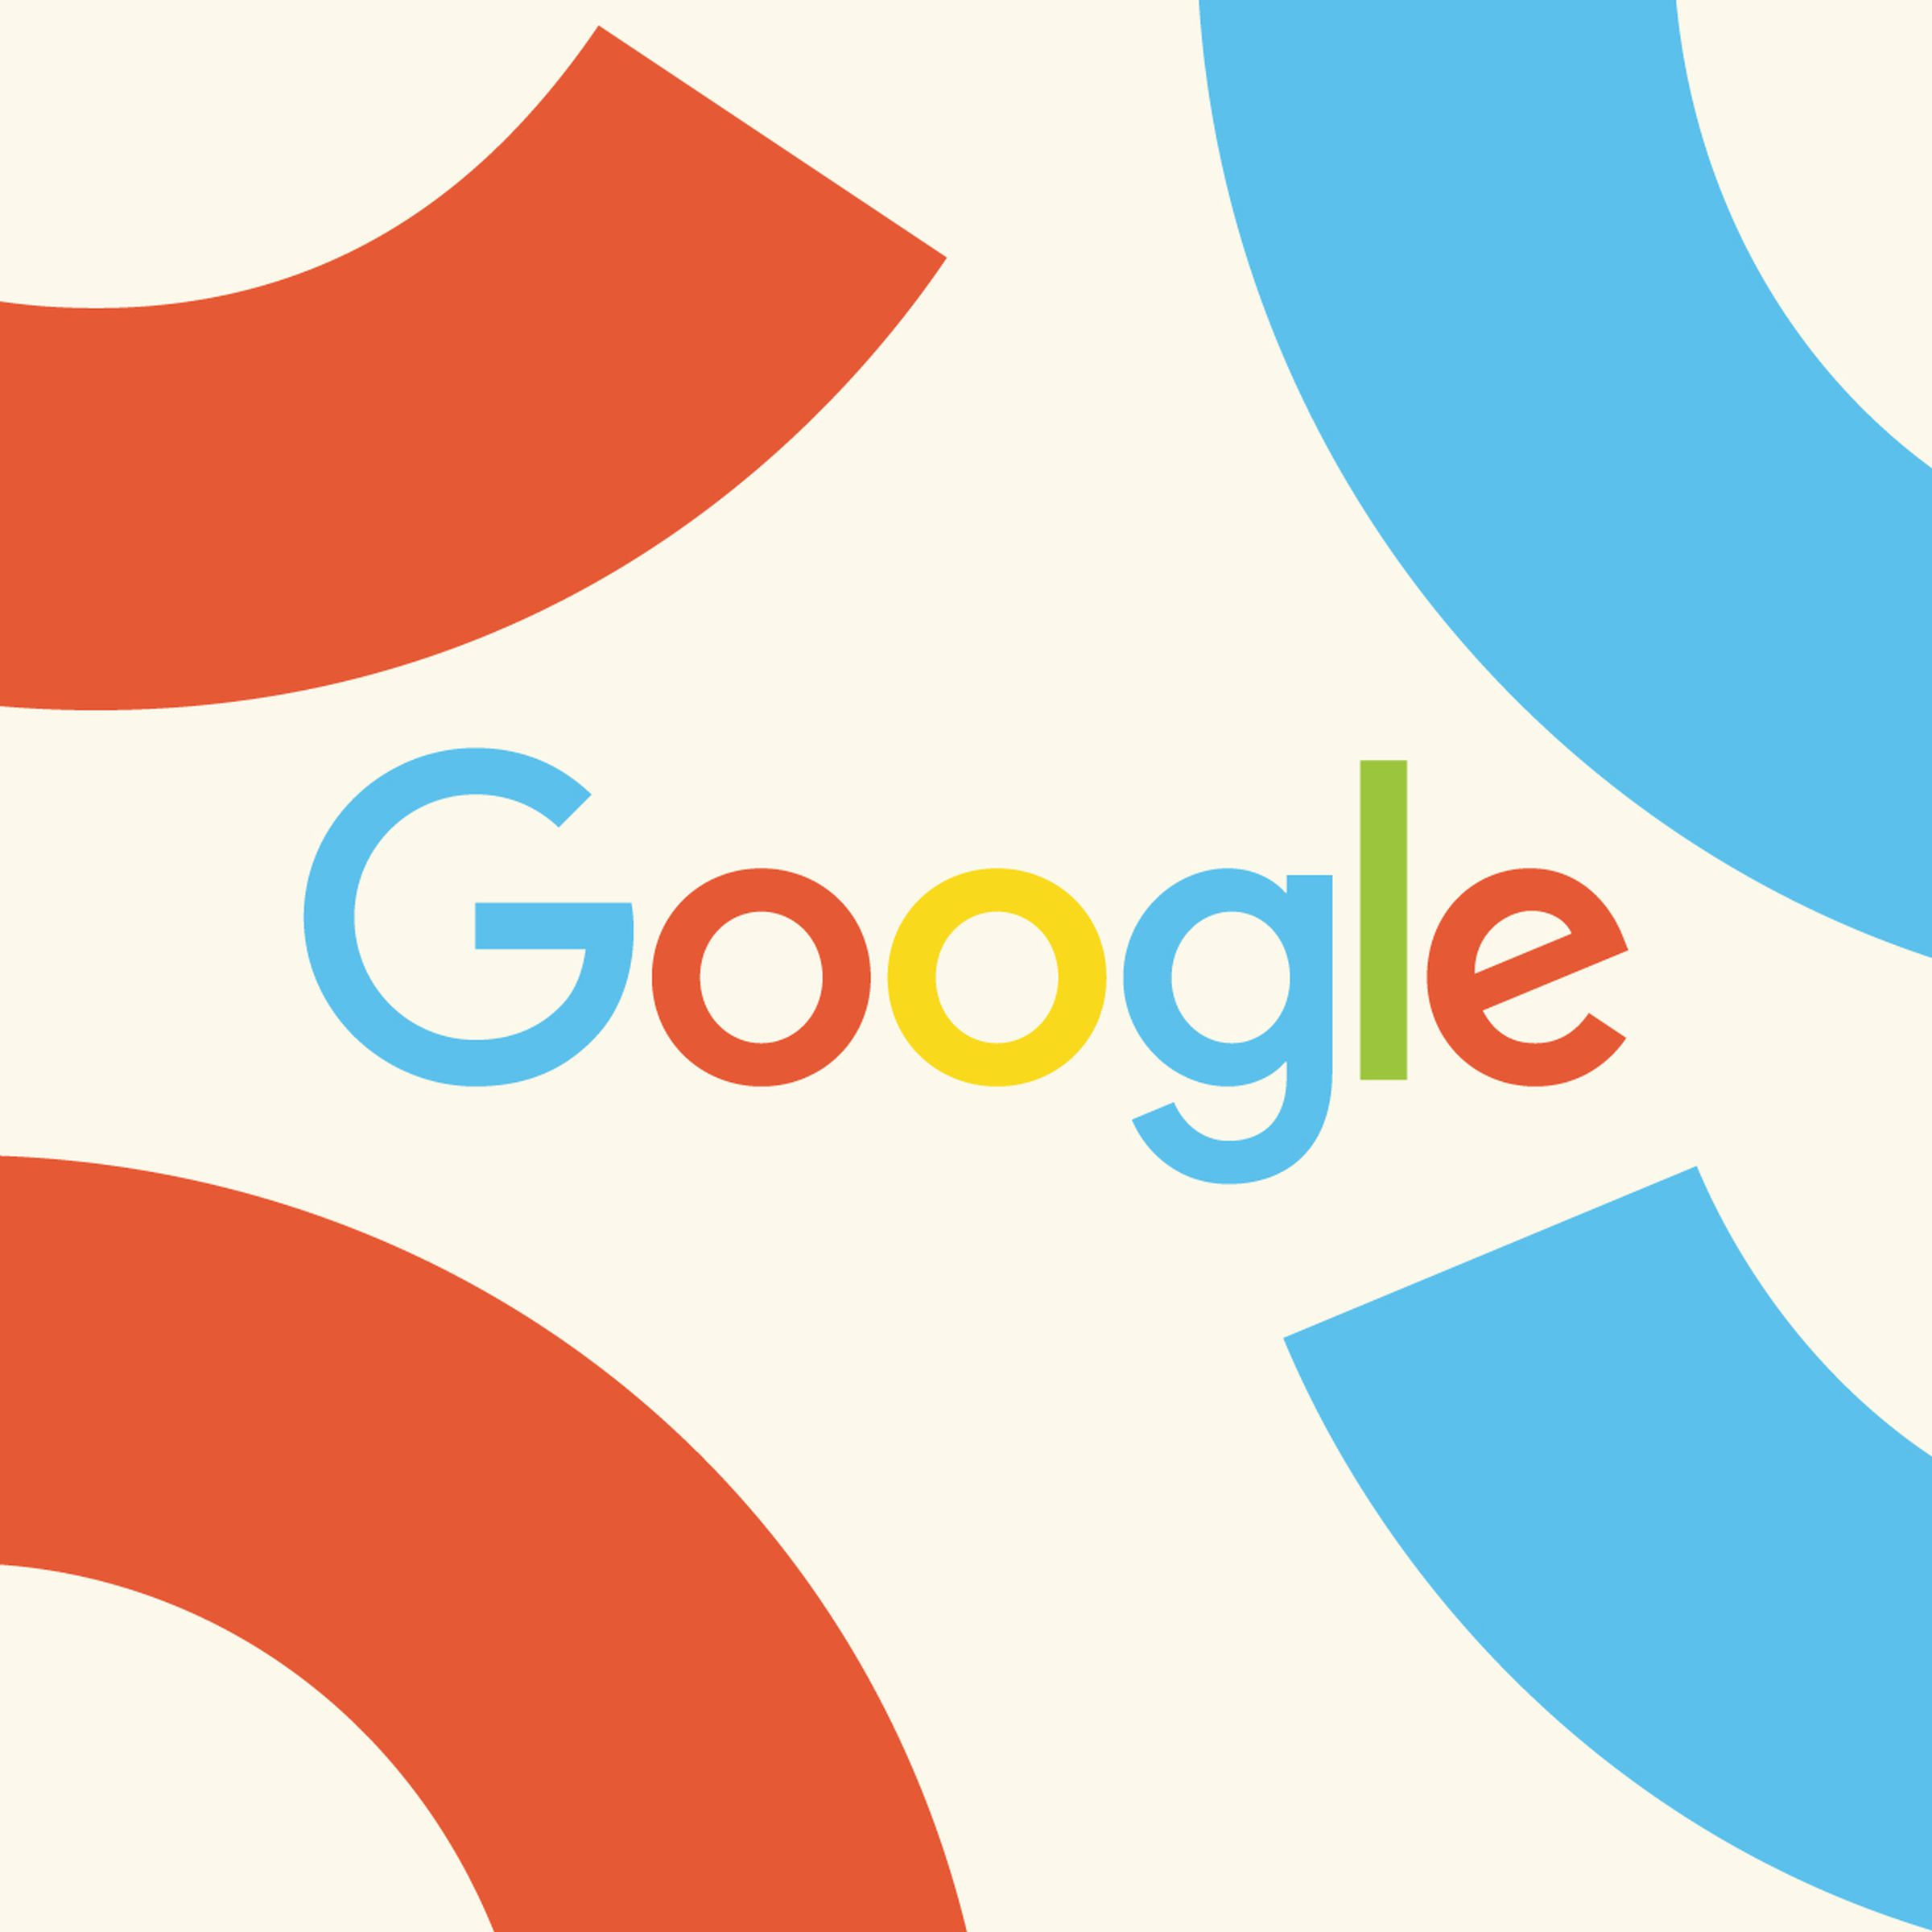 Google logo with colorful shapes